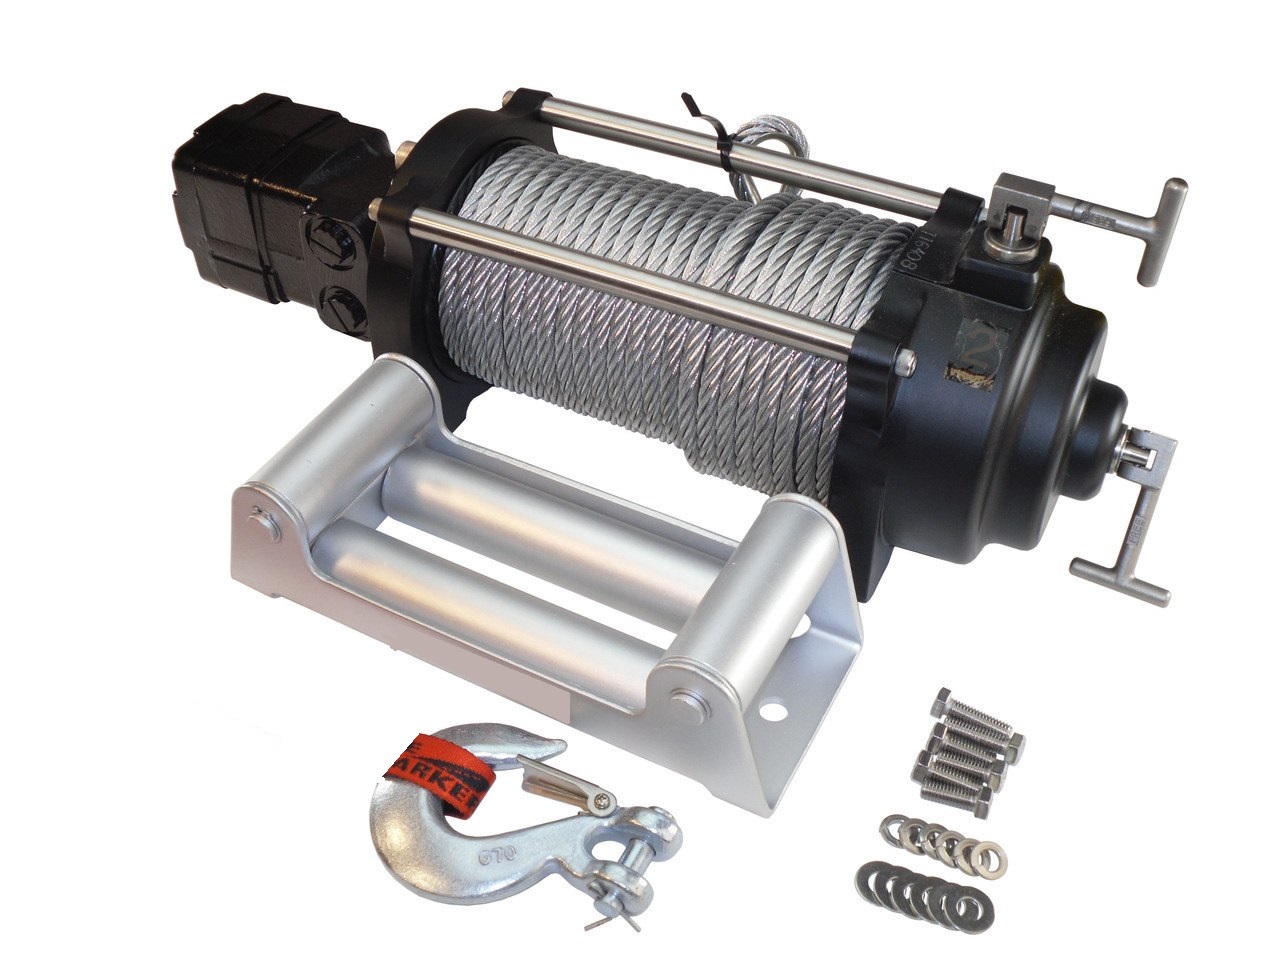 Hydraulic Winch Market to Register healthy CAGR of 3.7% During 2019-2024